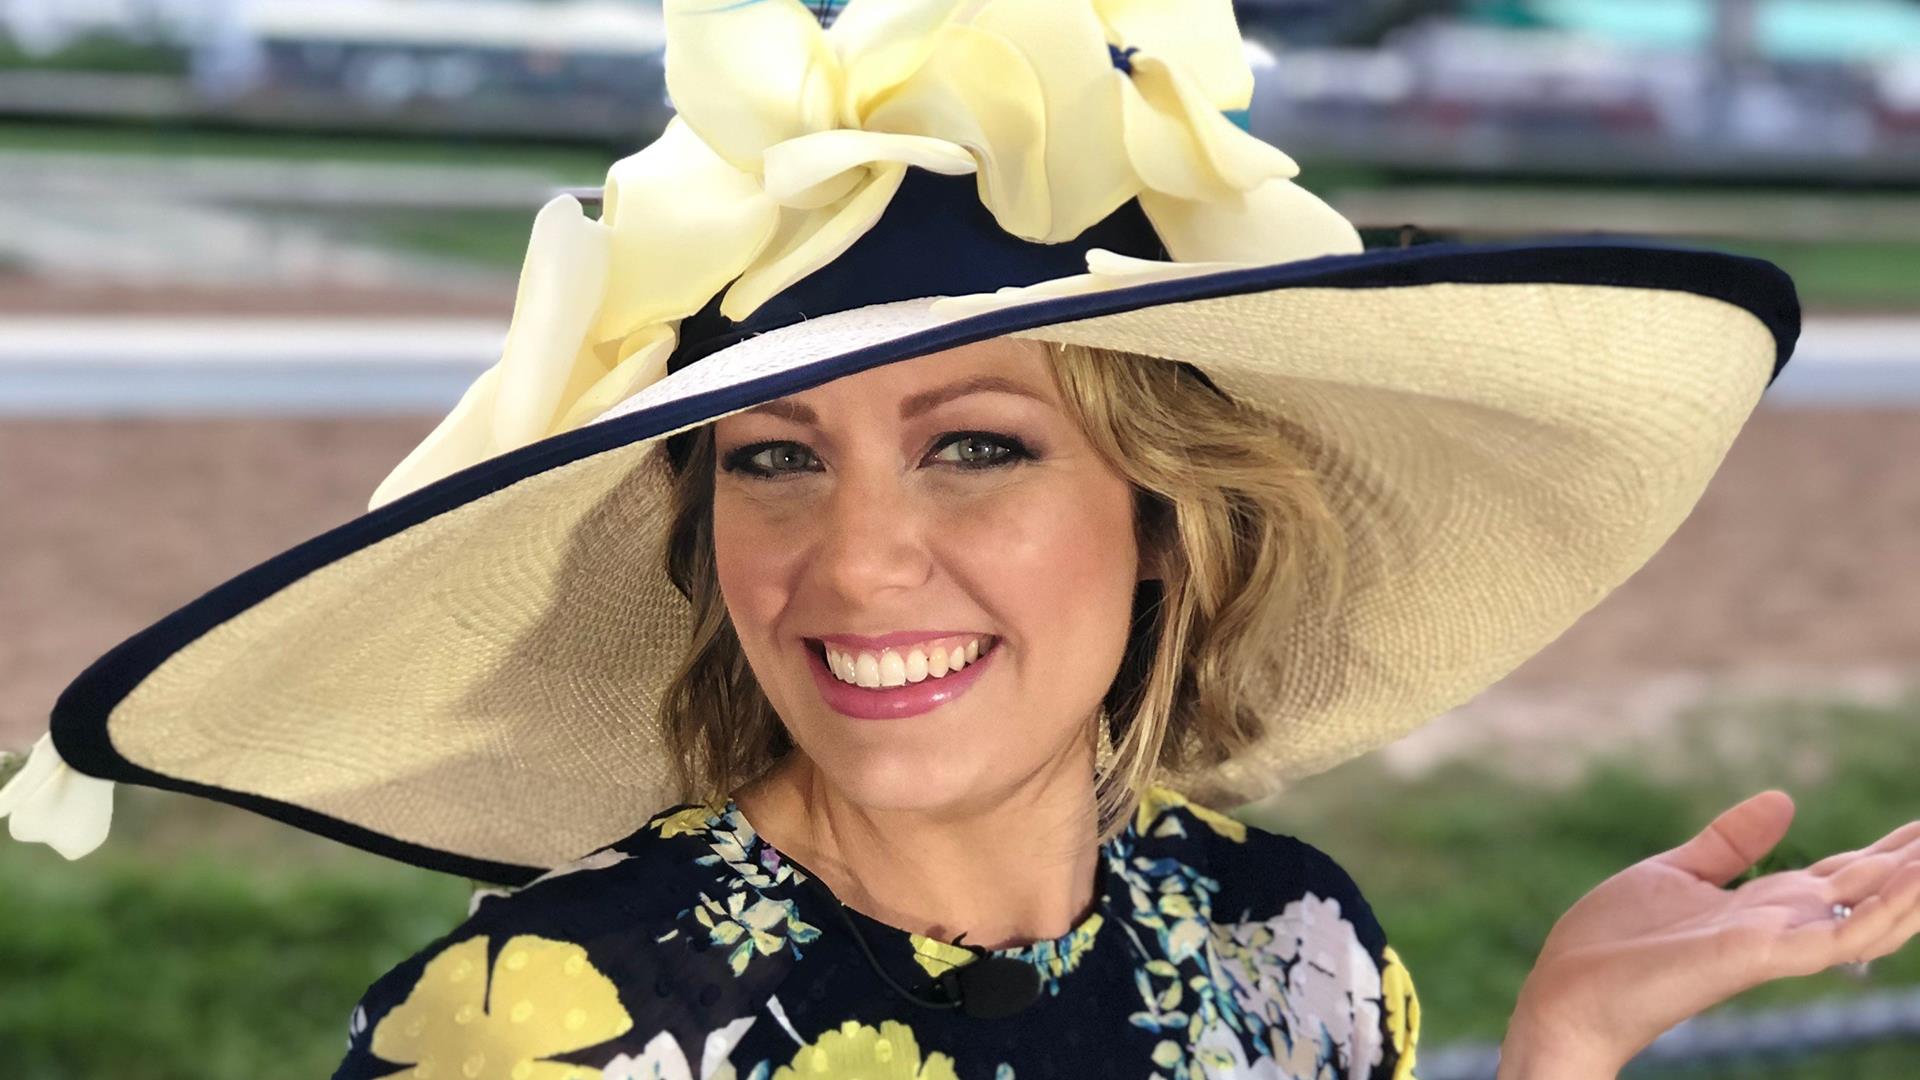 See Dylan Dreyer's fancy hat was made